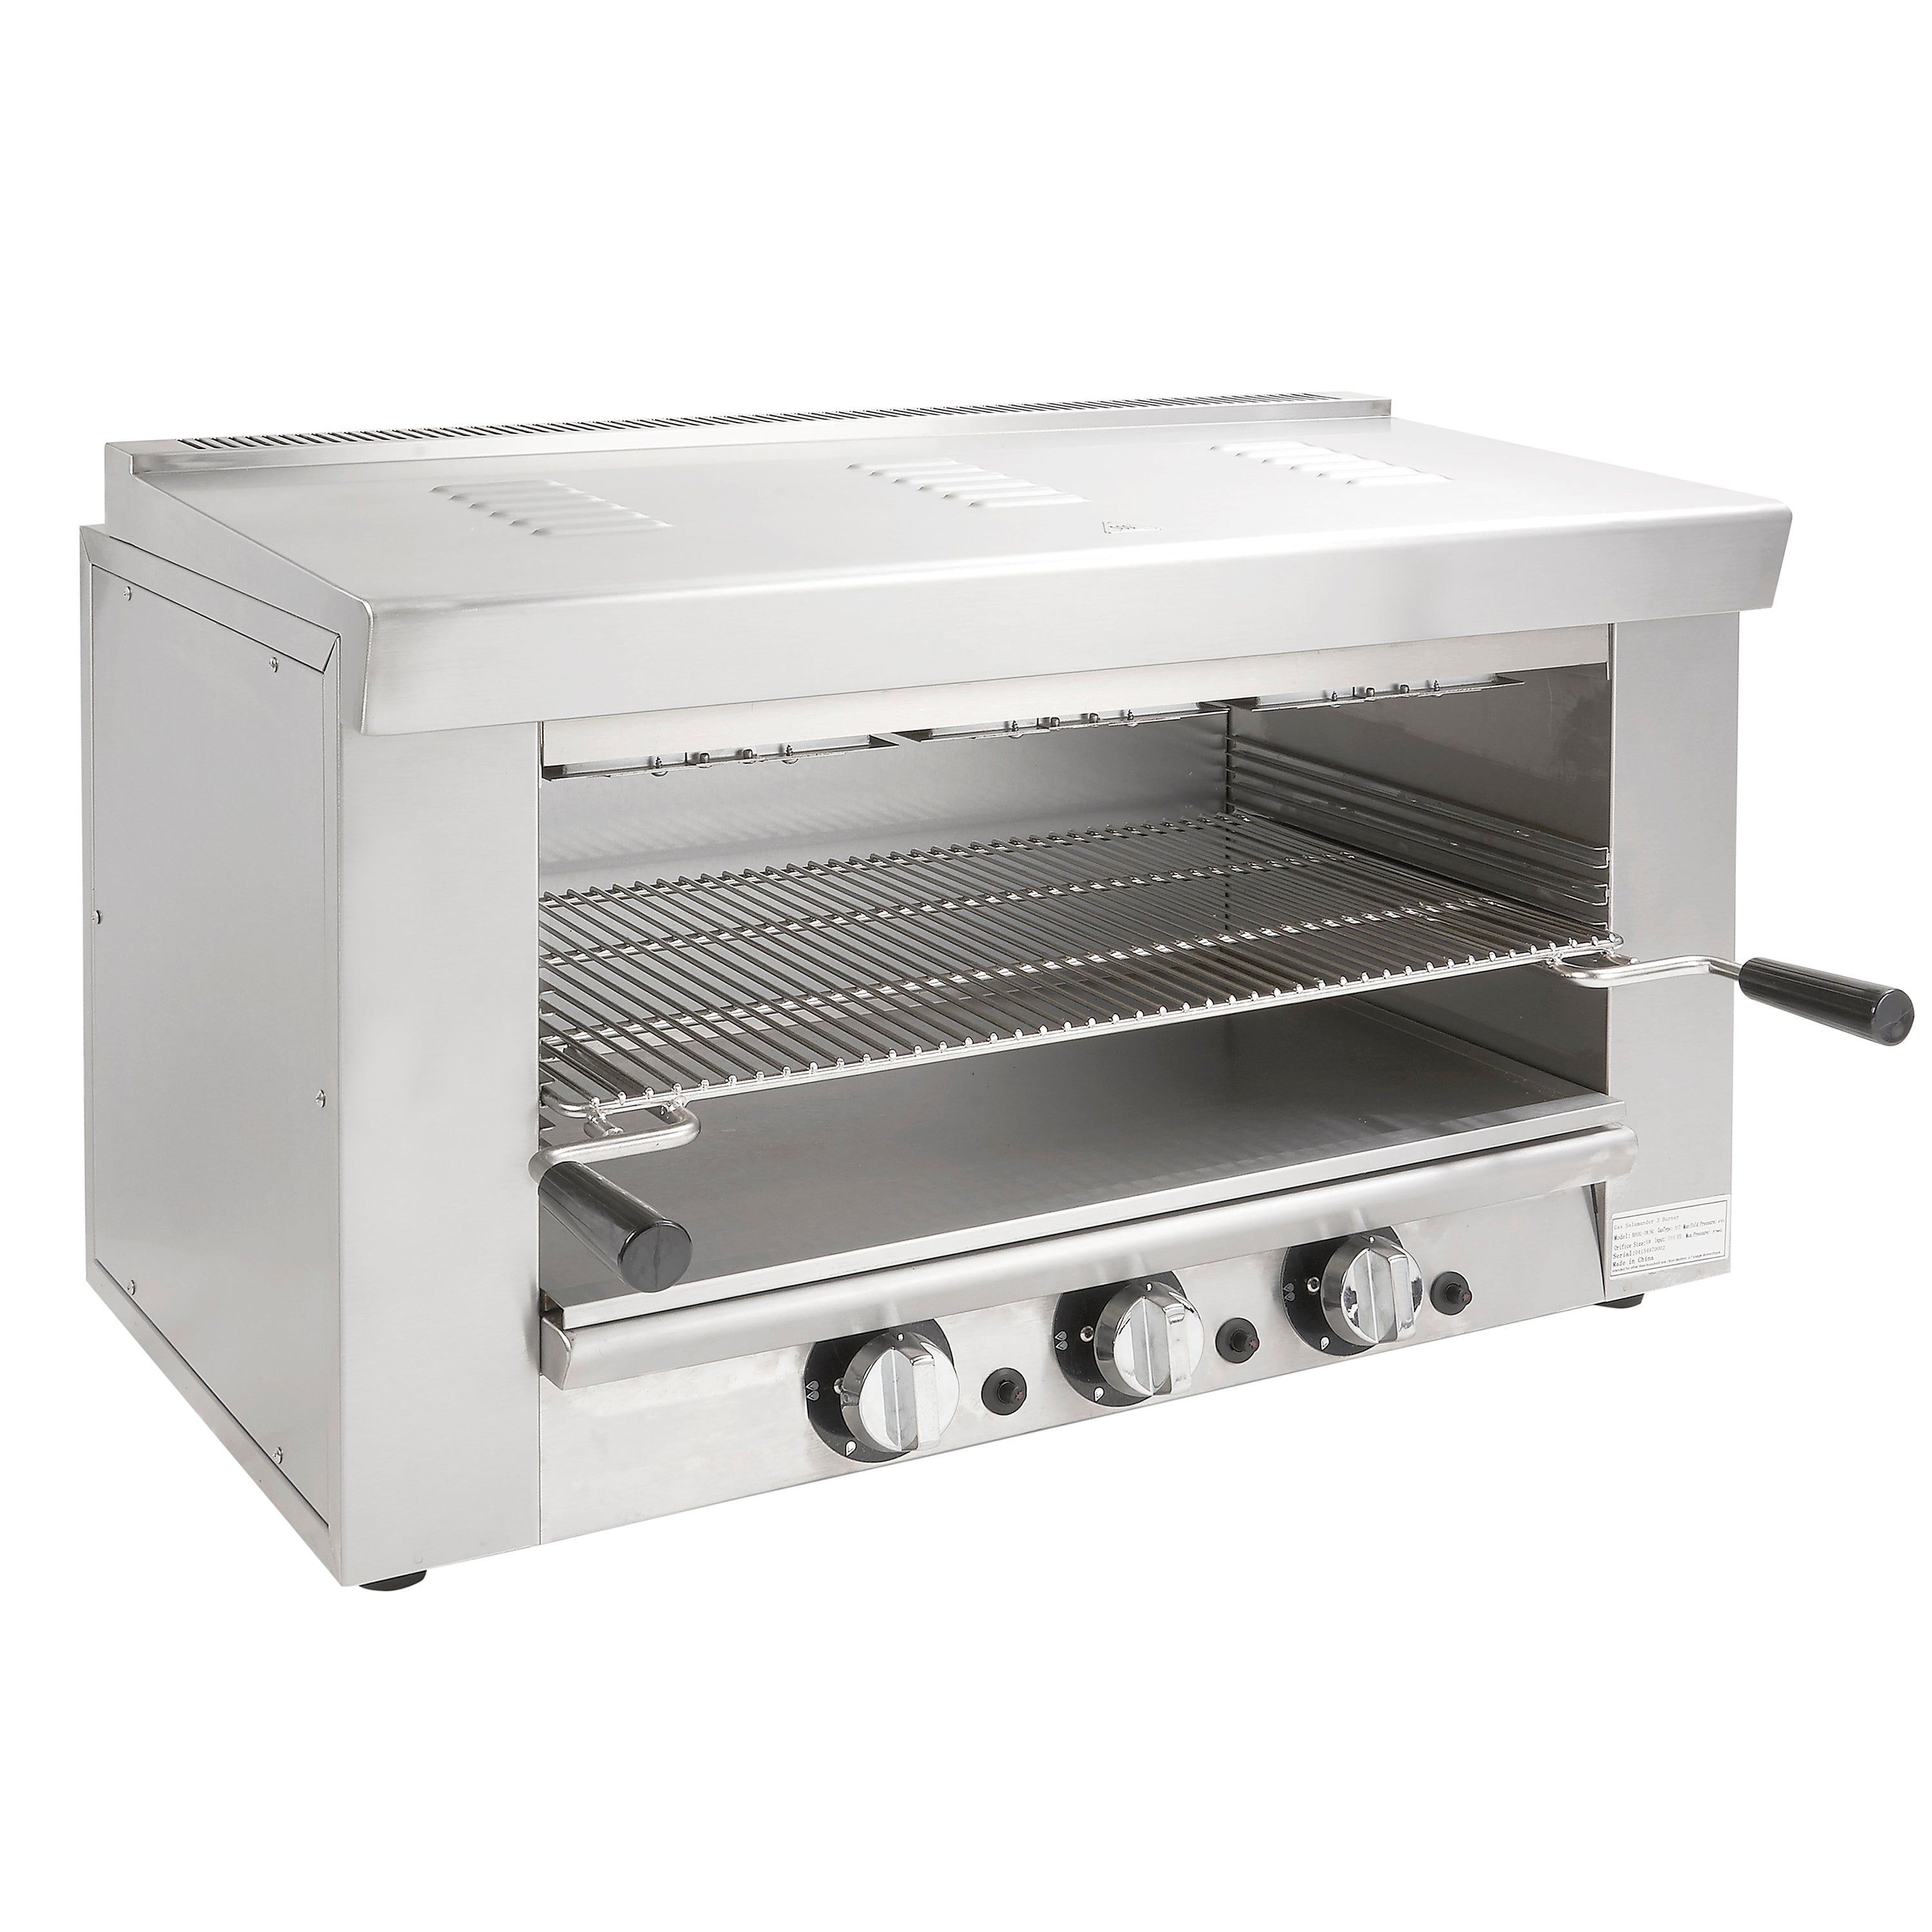 Adcraft CHM-1200W Cheesemelter, Electric